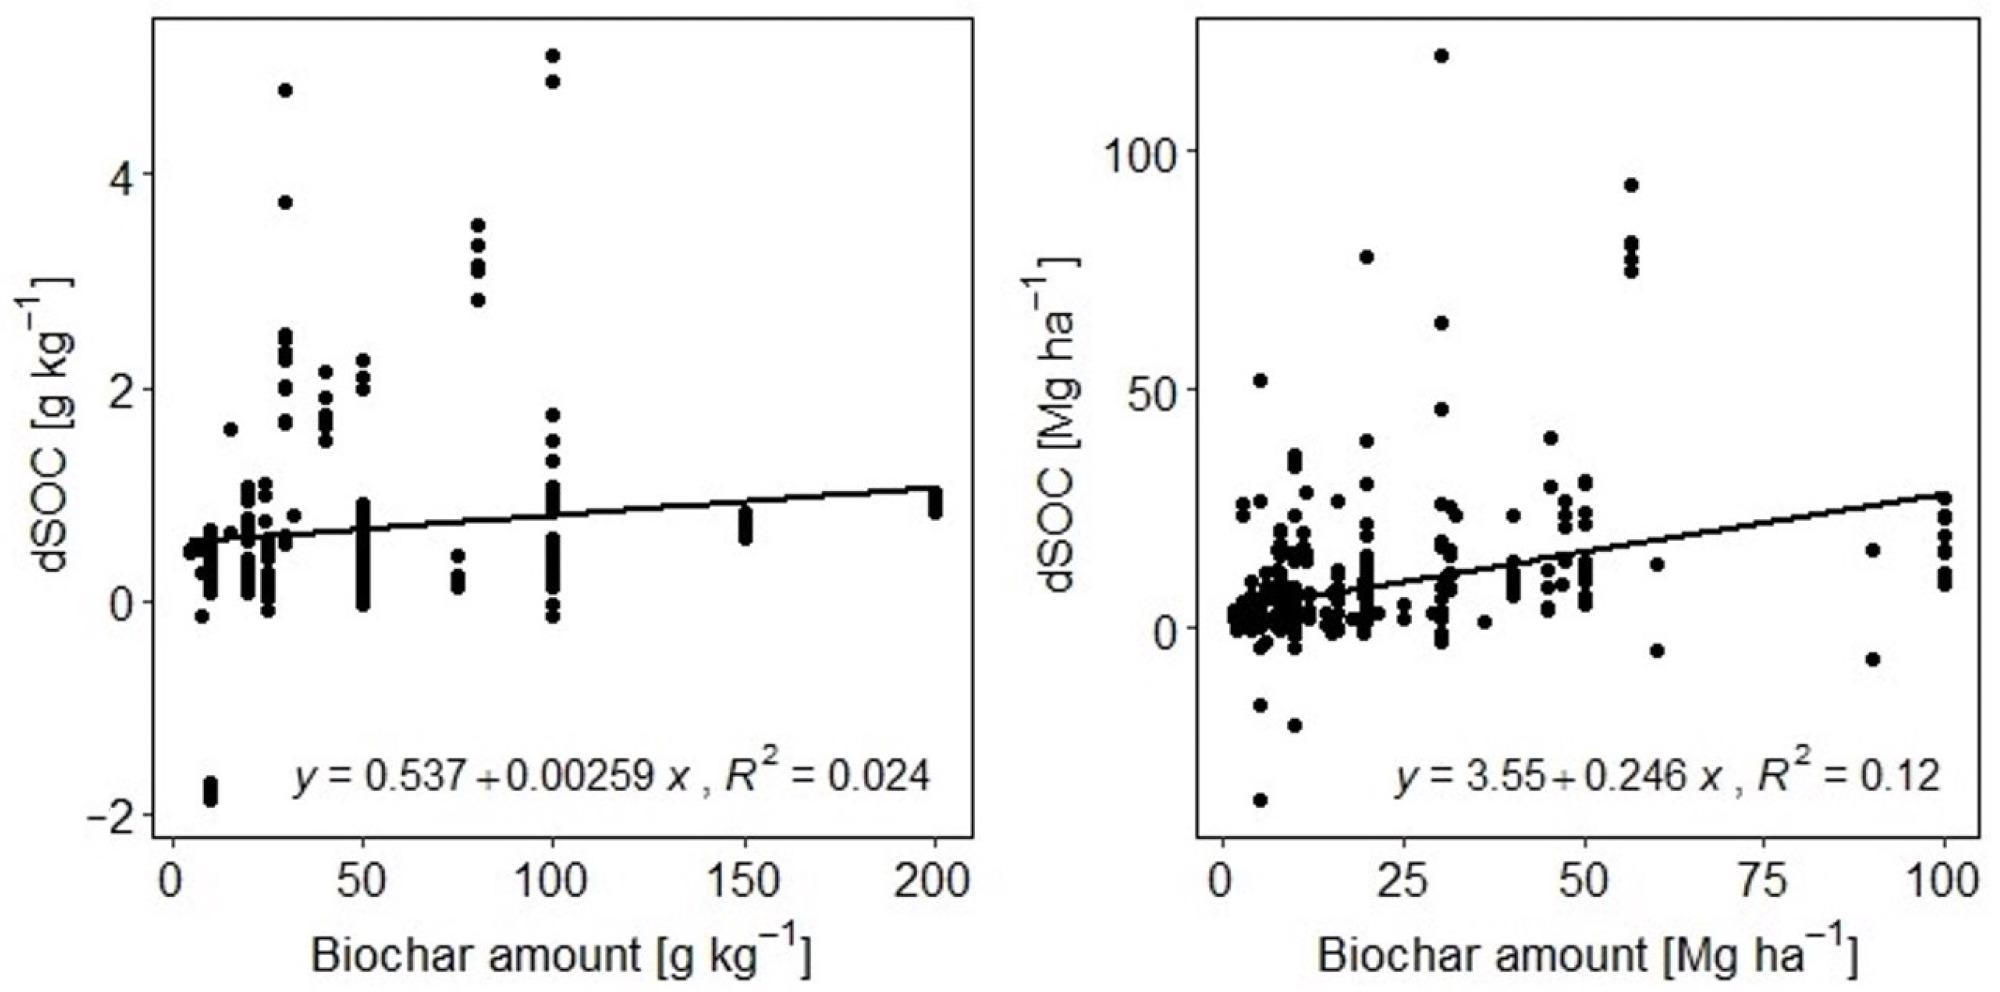 Relationship between the biochar amount and absolute SOC difference (dSOC) and, in laboratory and greenhouse treatments (left) and field treatments (right). In laboratory and greenhouse treatments both variables are given as g kg-1, and field treatments both variables are given as Mg ha-1. R2 represents the coefficient of determination.